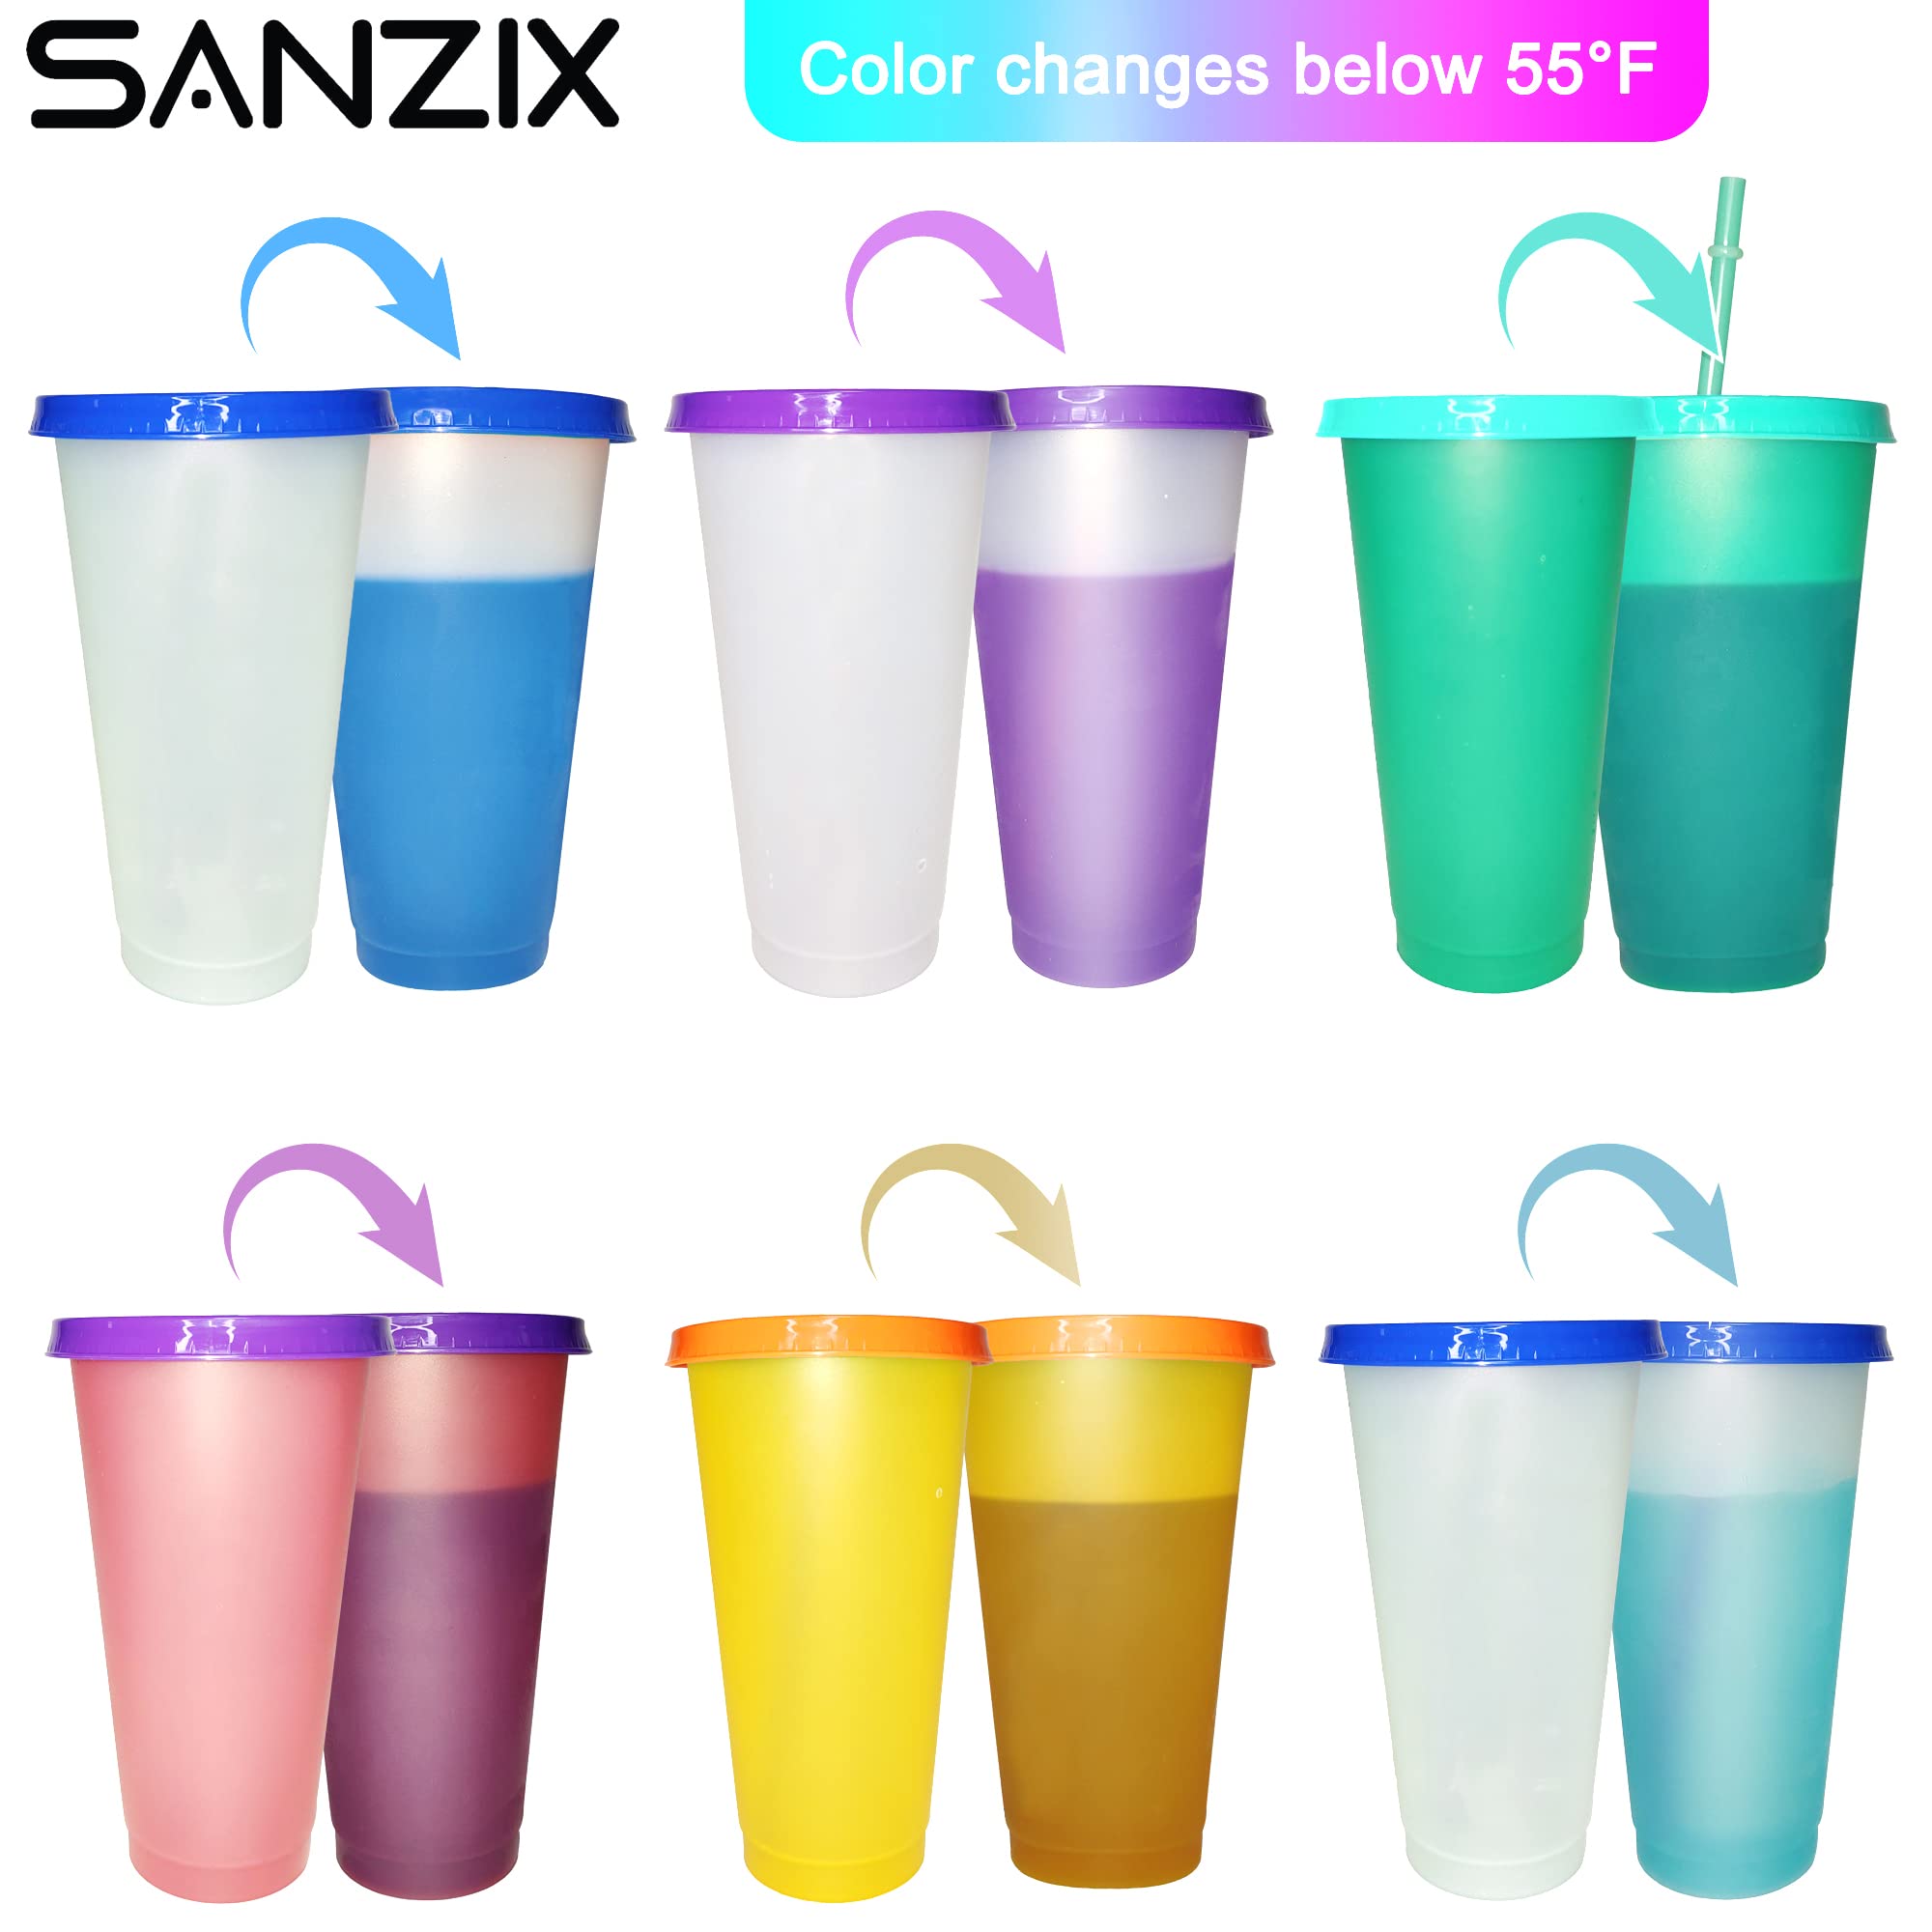 Sanzix Tumblers with Lids and Straws - 6 Pack 24oz Color Changing Cups with Lids and Straws, Reusable Cups with Lids and Straws for Party, Travel, Iced Coffee, Smoothie, Reusable Cold Drink Cups